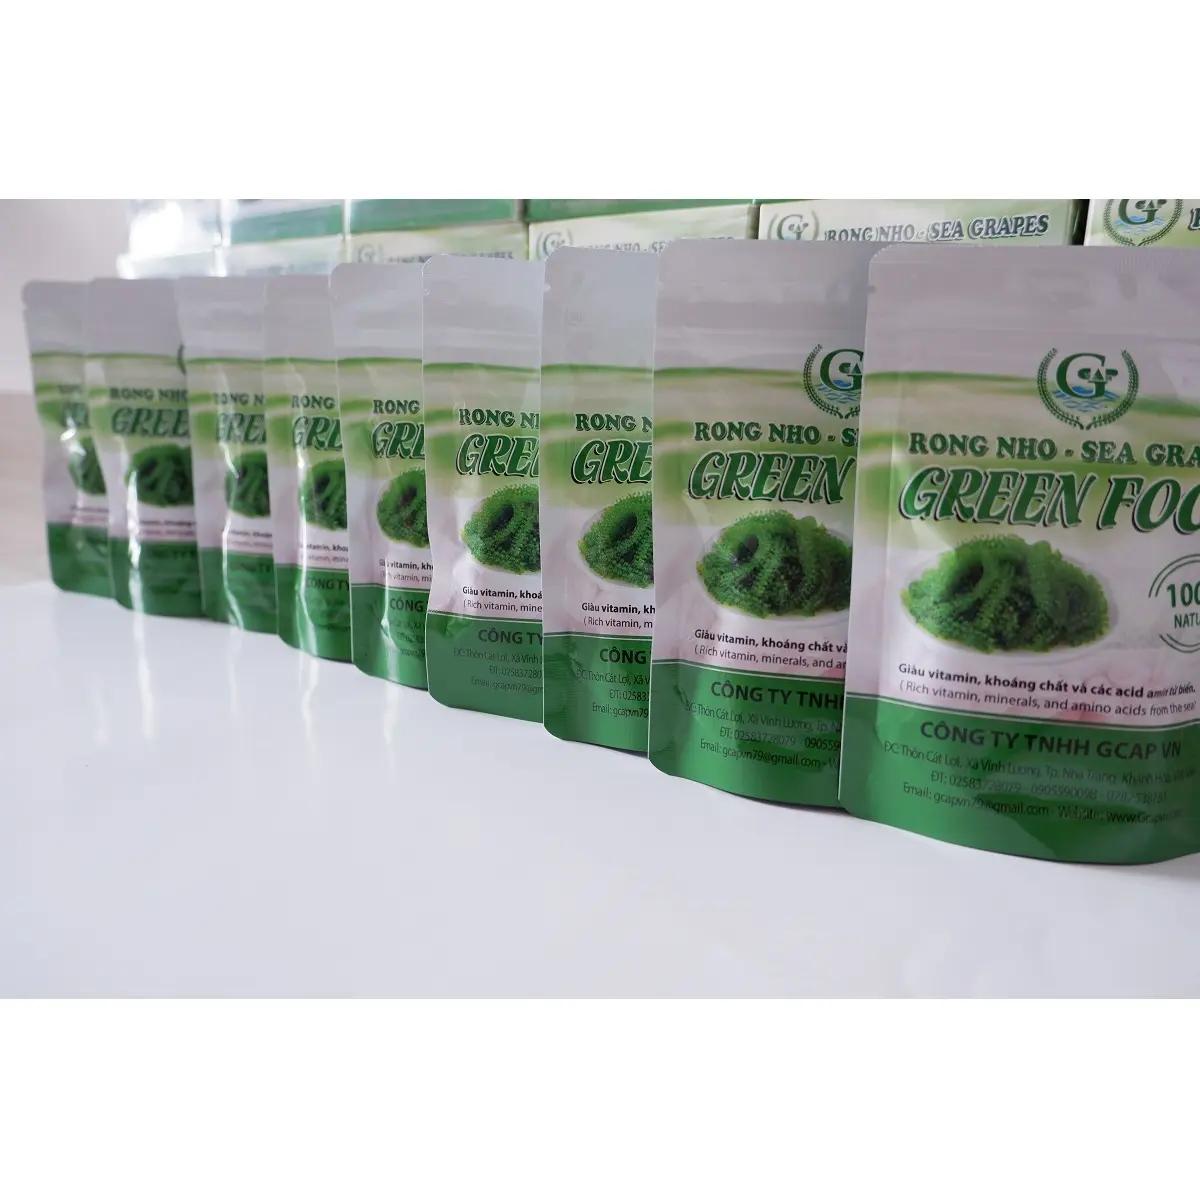 Natural Green GCAP VN Manufacturer Green Food Seasoned Salted Sea Grapes 100 Grams With Zipper From Viet Nam